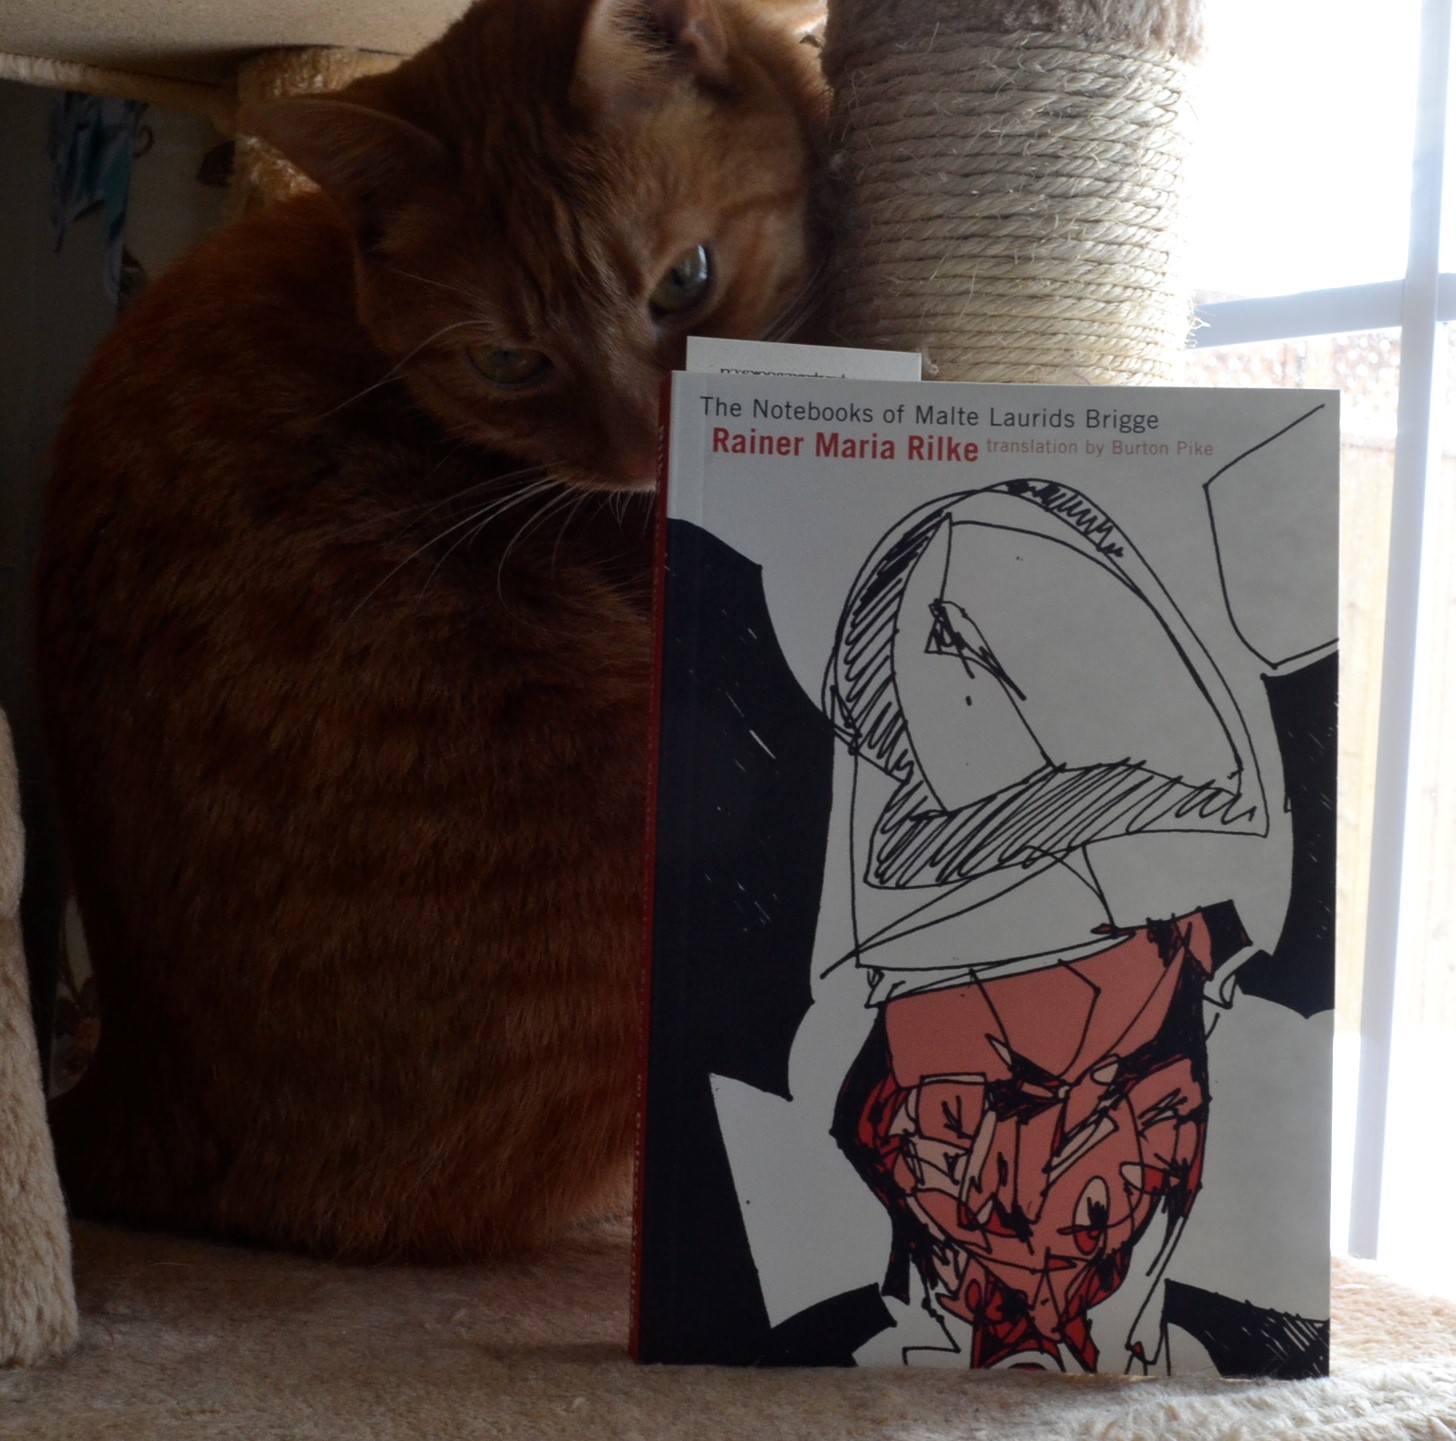 An orange tabby sits behind The Notebooks of Malte Laurids Brigge.